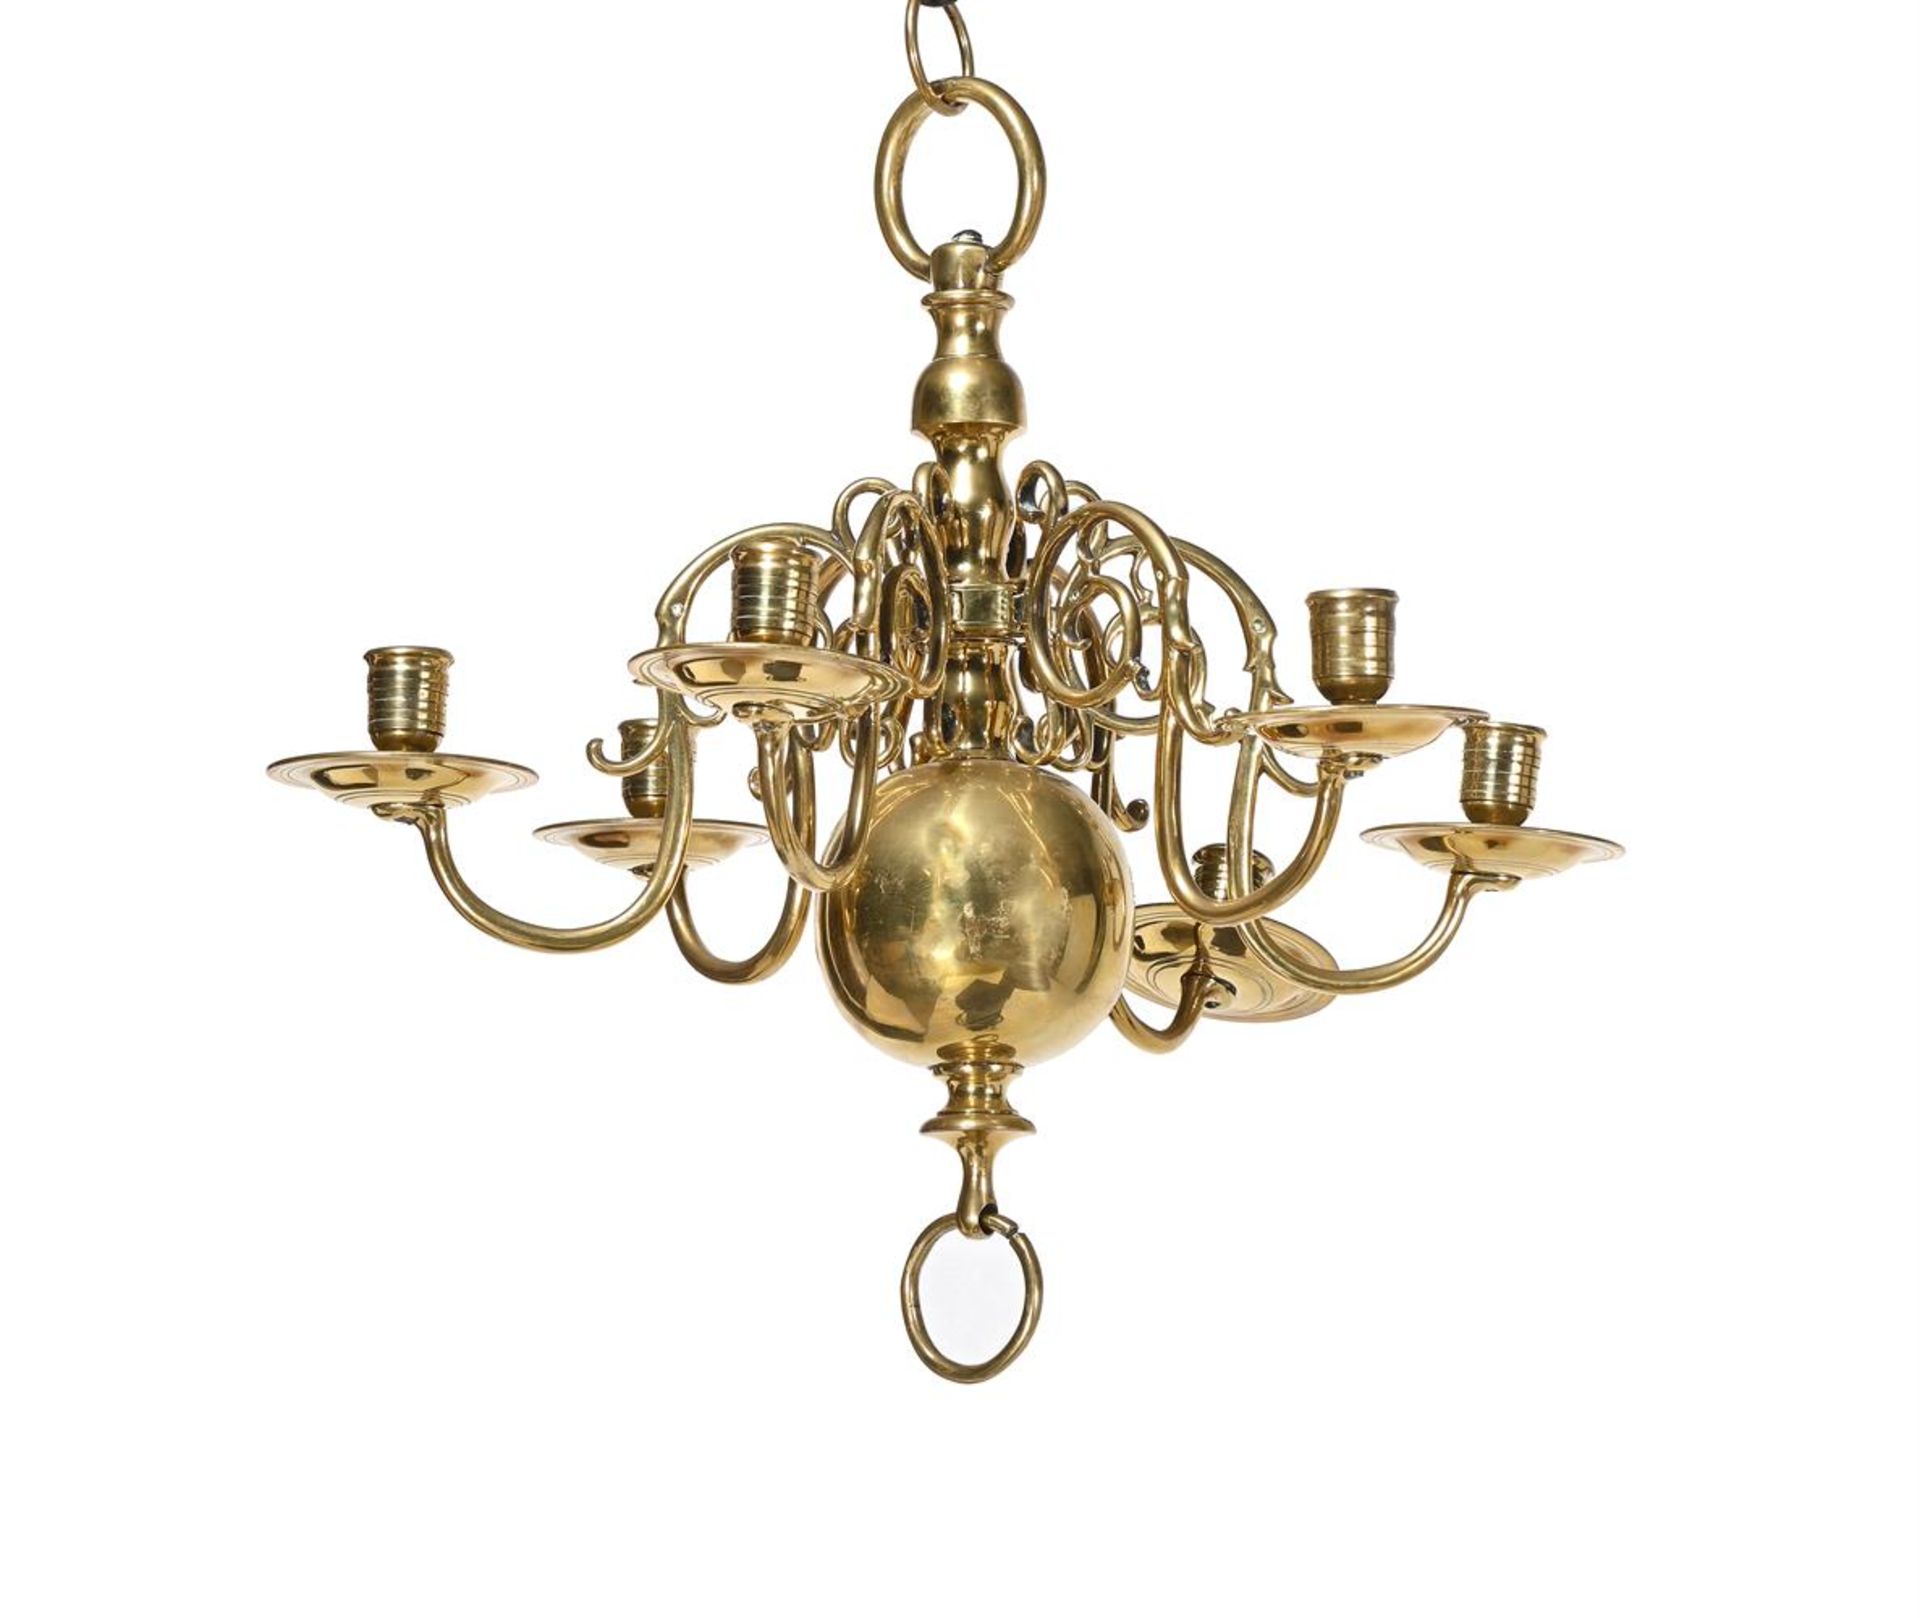 A PAIR OF BRASS SIX LIGHT CHANDELIERS, IN DUTCH 17TH CENTURY STYLE, EARLY 19TH CENTURY - Image 3 of 3